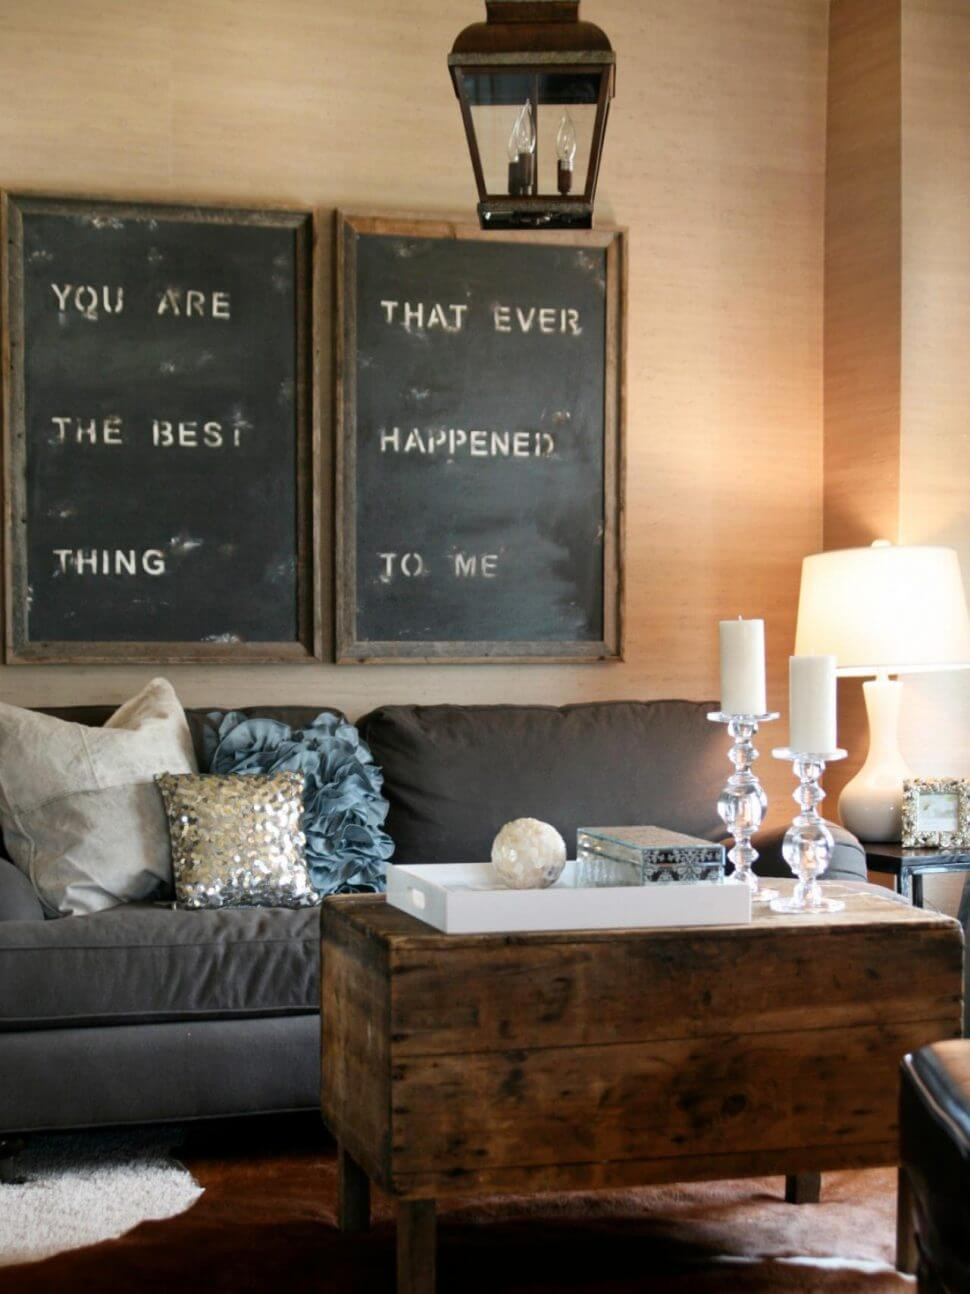 Rustic Living Room Wall Art
 33 Best Rustic Living Room Wall Decor Ideas and Designs